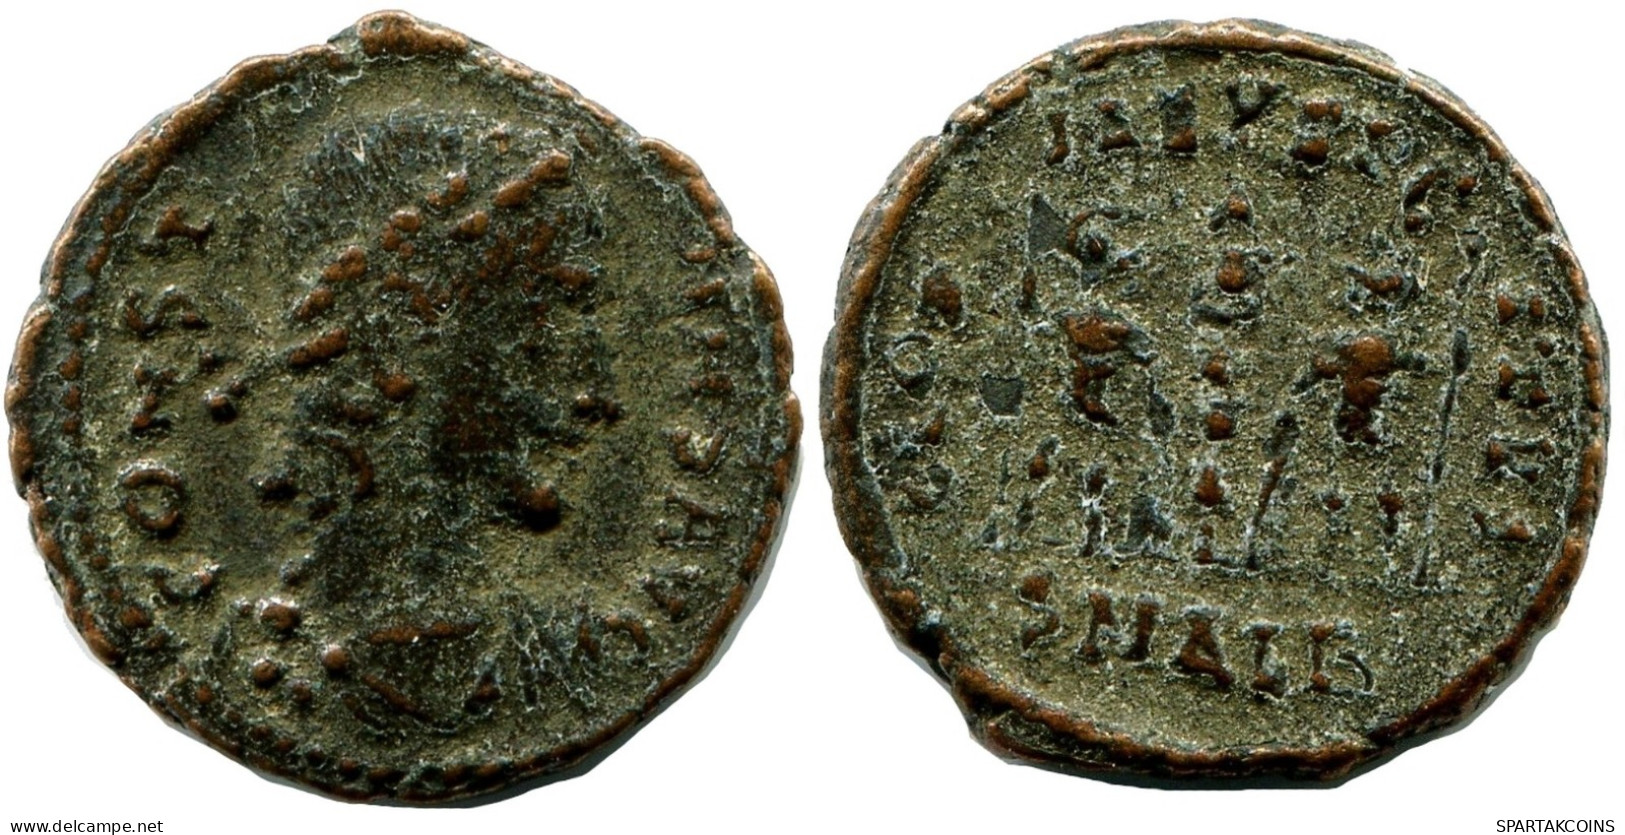 CONSTANS MINTED IN ALEKSANDRIA FROM THE ROYAL ONTARIO MUSEUM #ANC11483.14.F.A - El Impero Christiano (307 / 363)